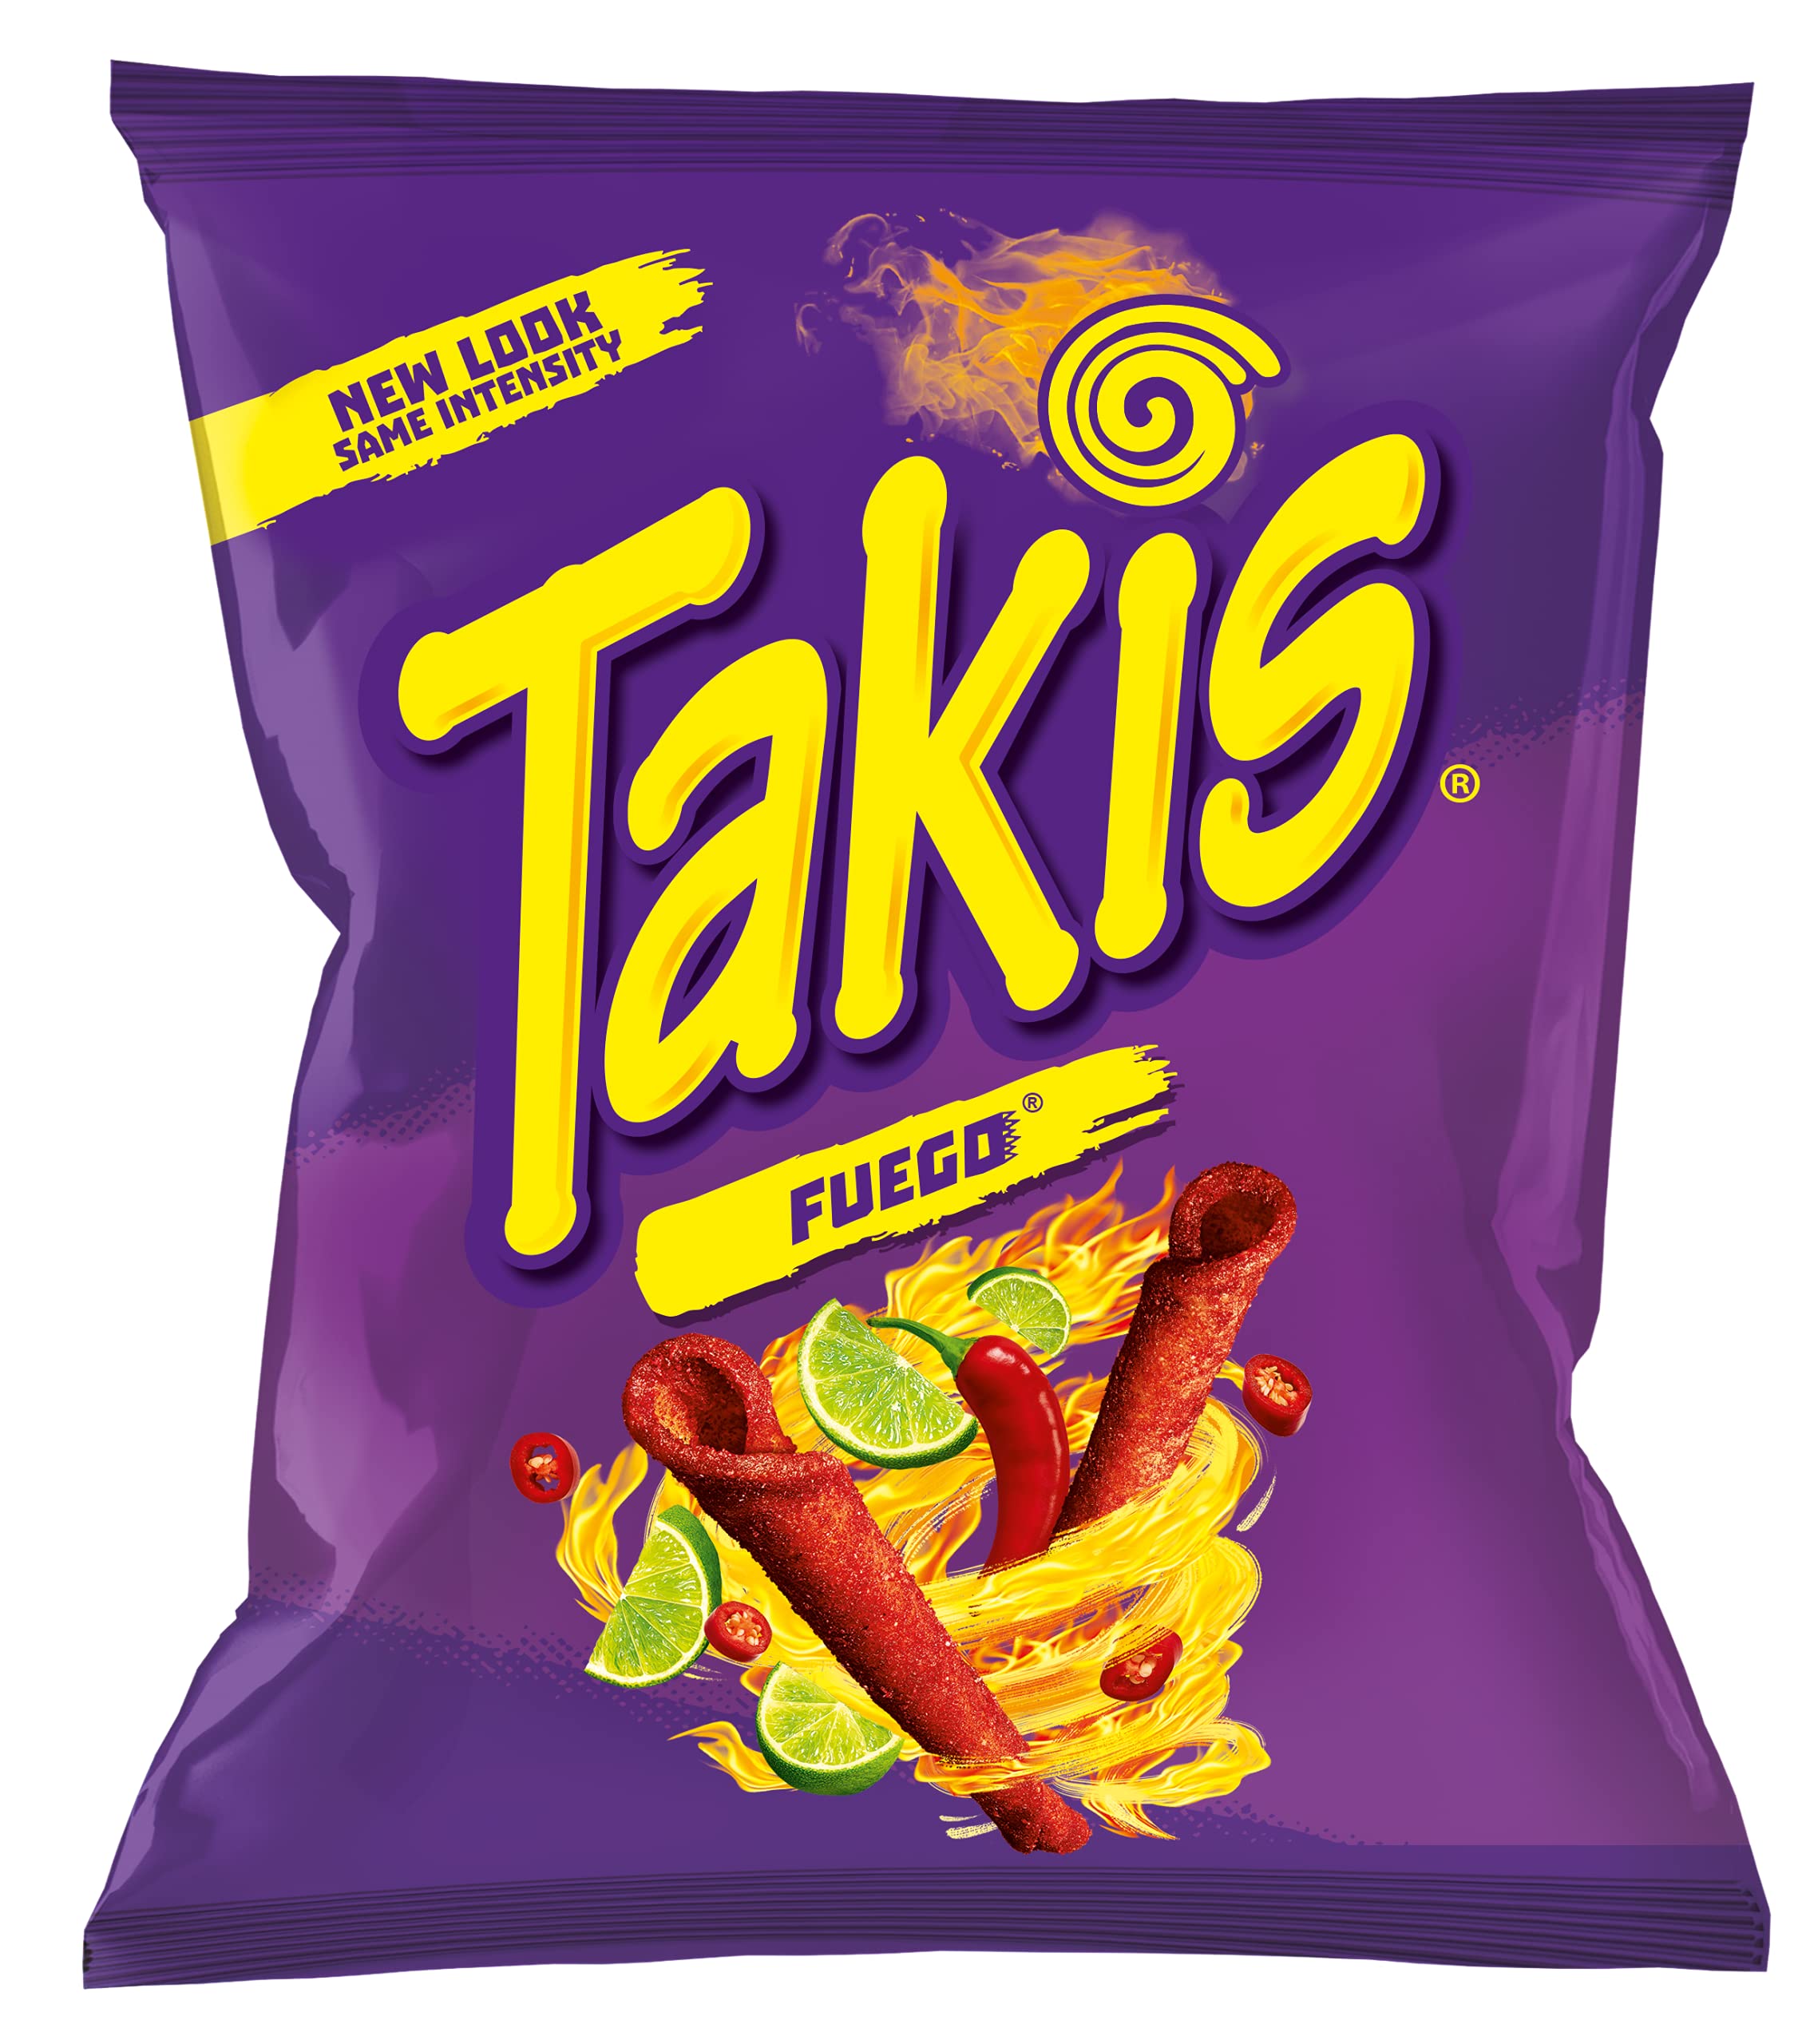 Barcel USA Takis - Crunchy Rolled Tortilla Chips – Fuego Flavor (Hot Chili Pepper & Lime), 4 Ounce (Pack of 16)